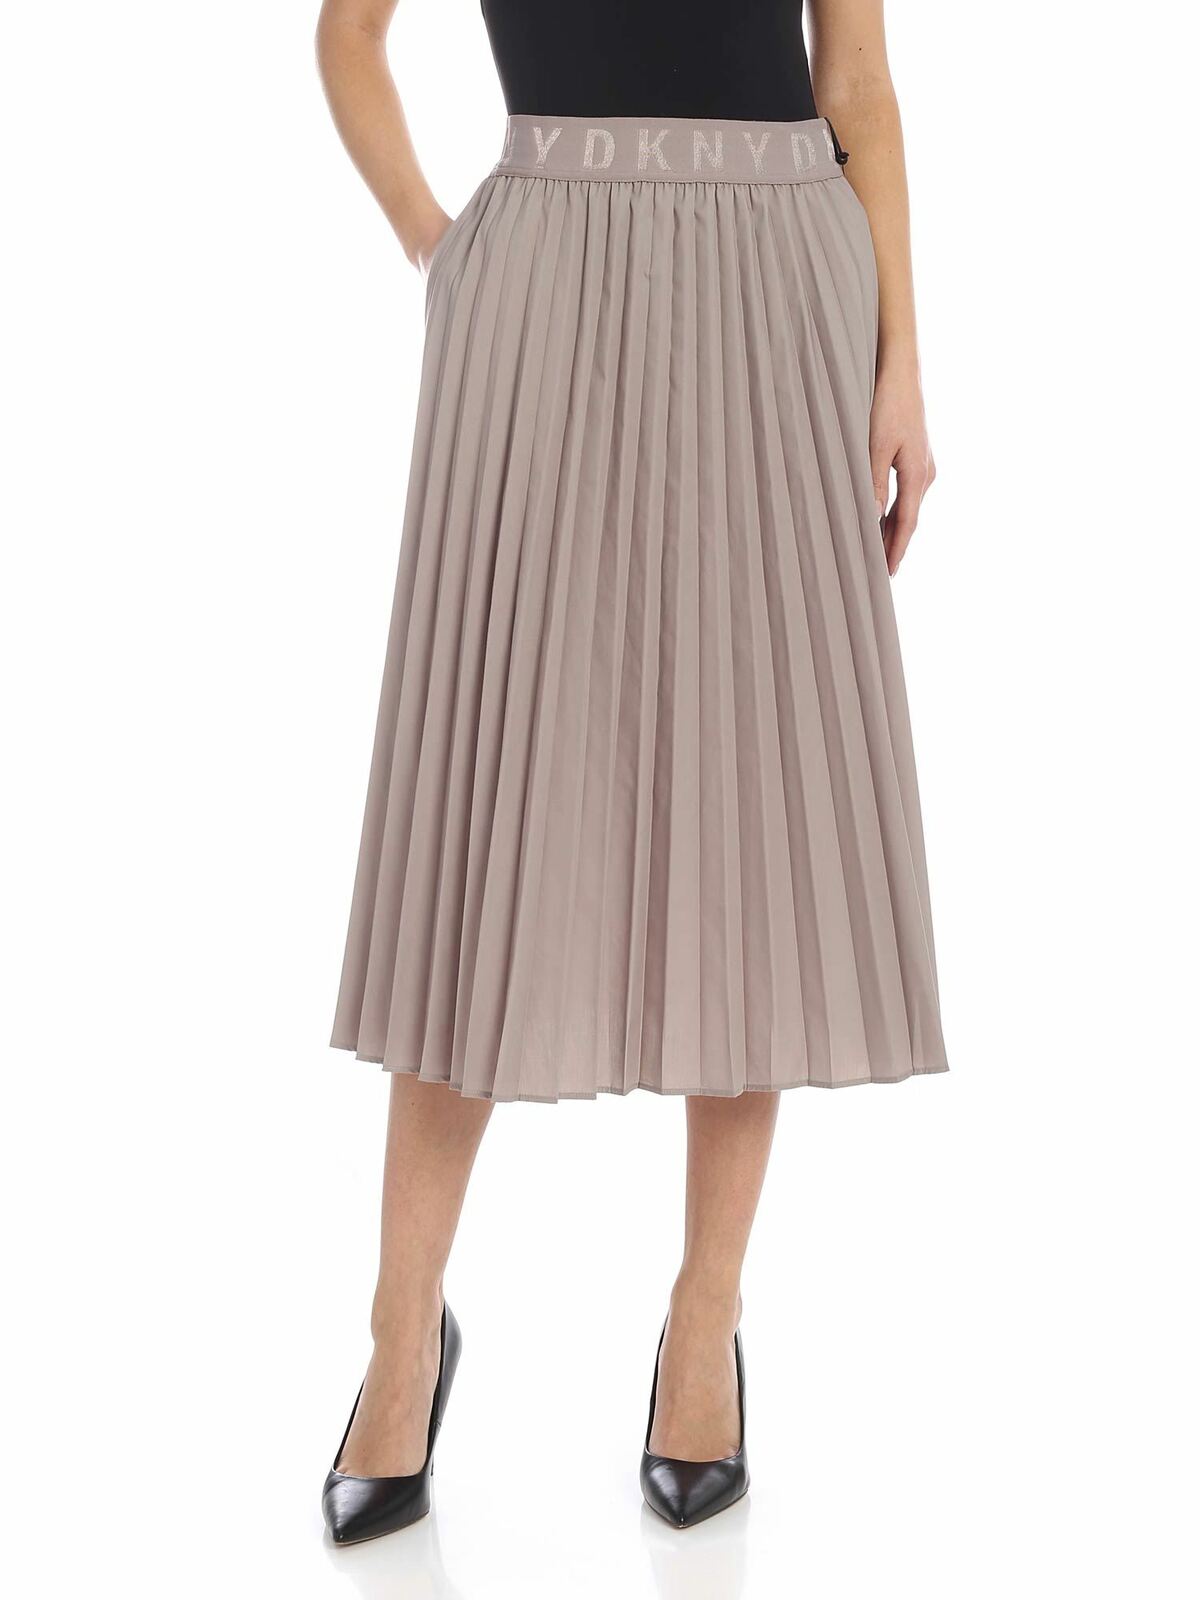 Dkny Pleated Skirt In Taupe Color With Branded Ela In Brown